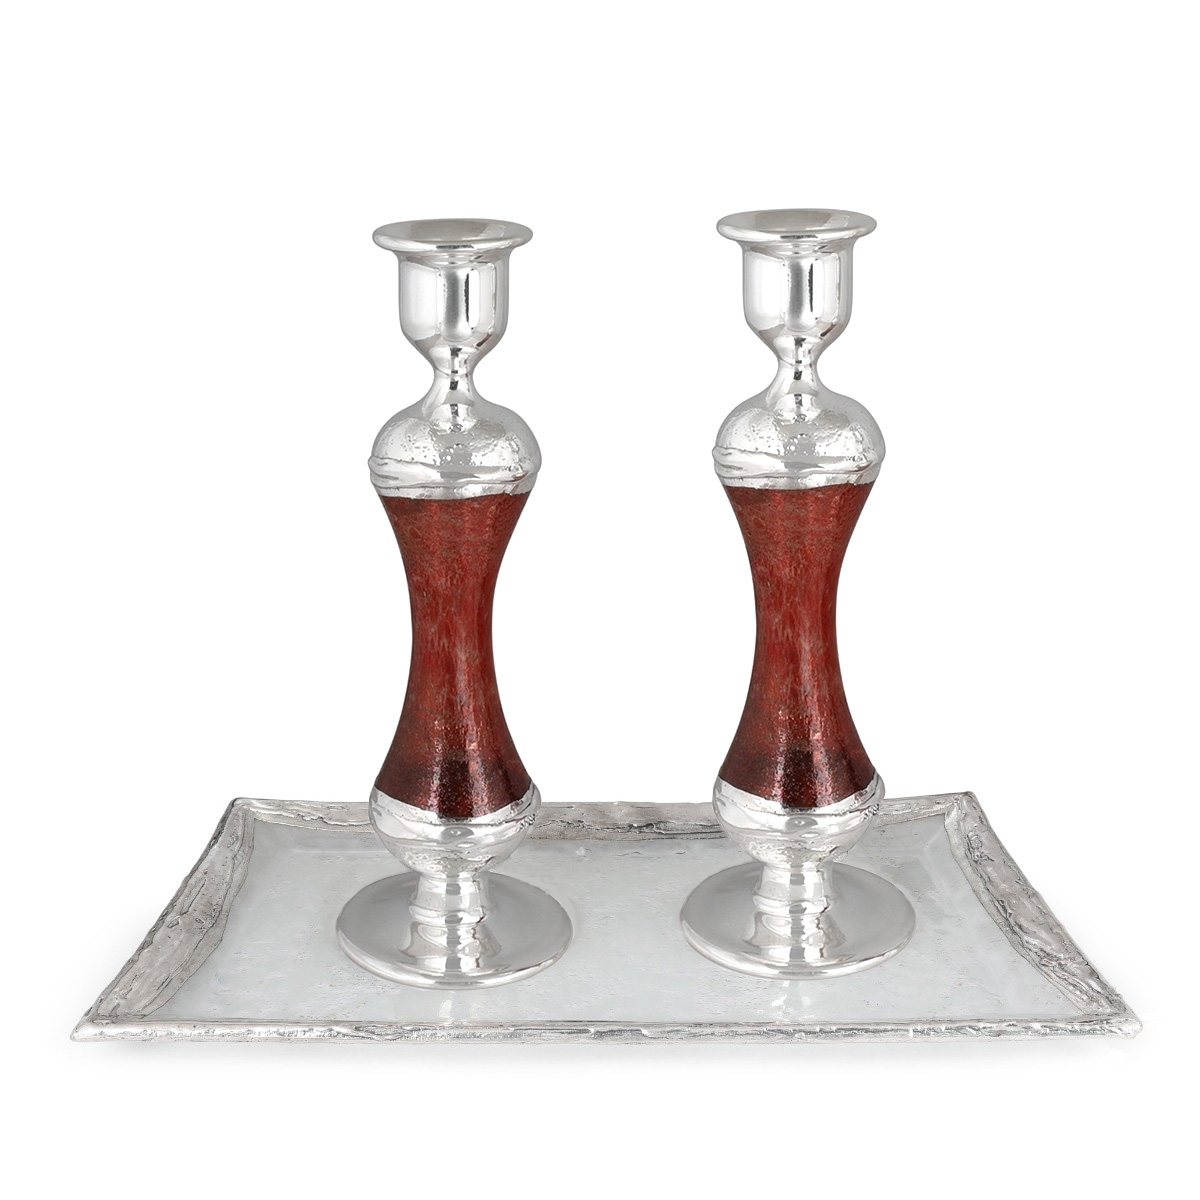 Tall Handmade Red Glass and Sterling Silver-Plated Shabbat Candlesticks - 1